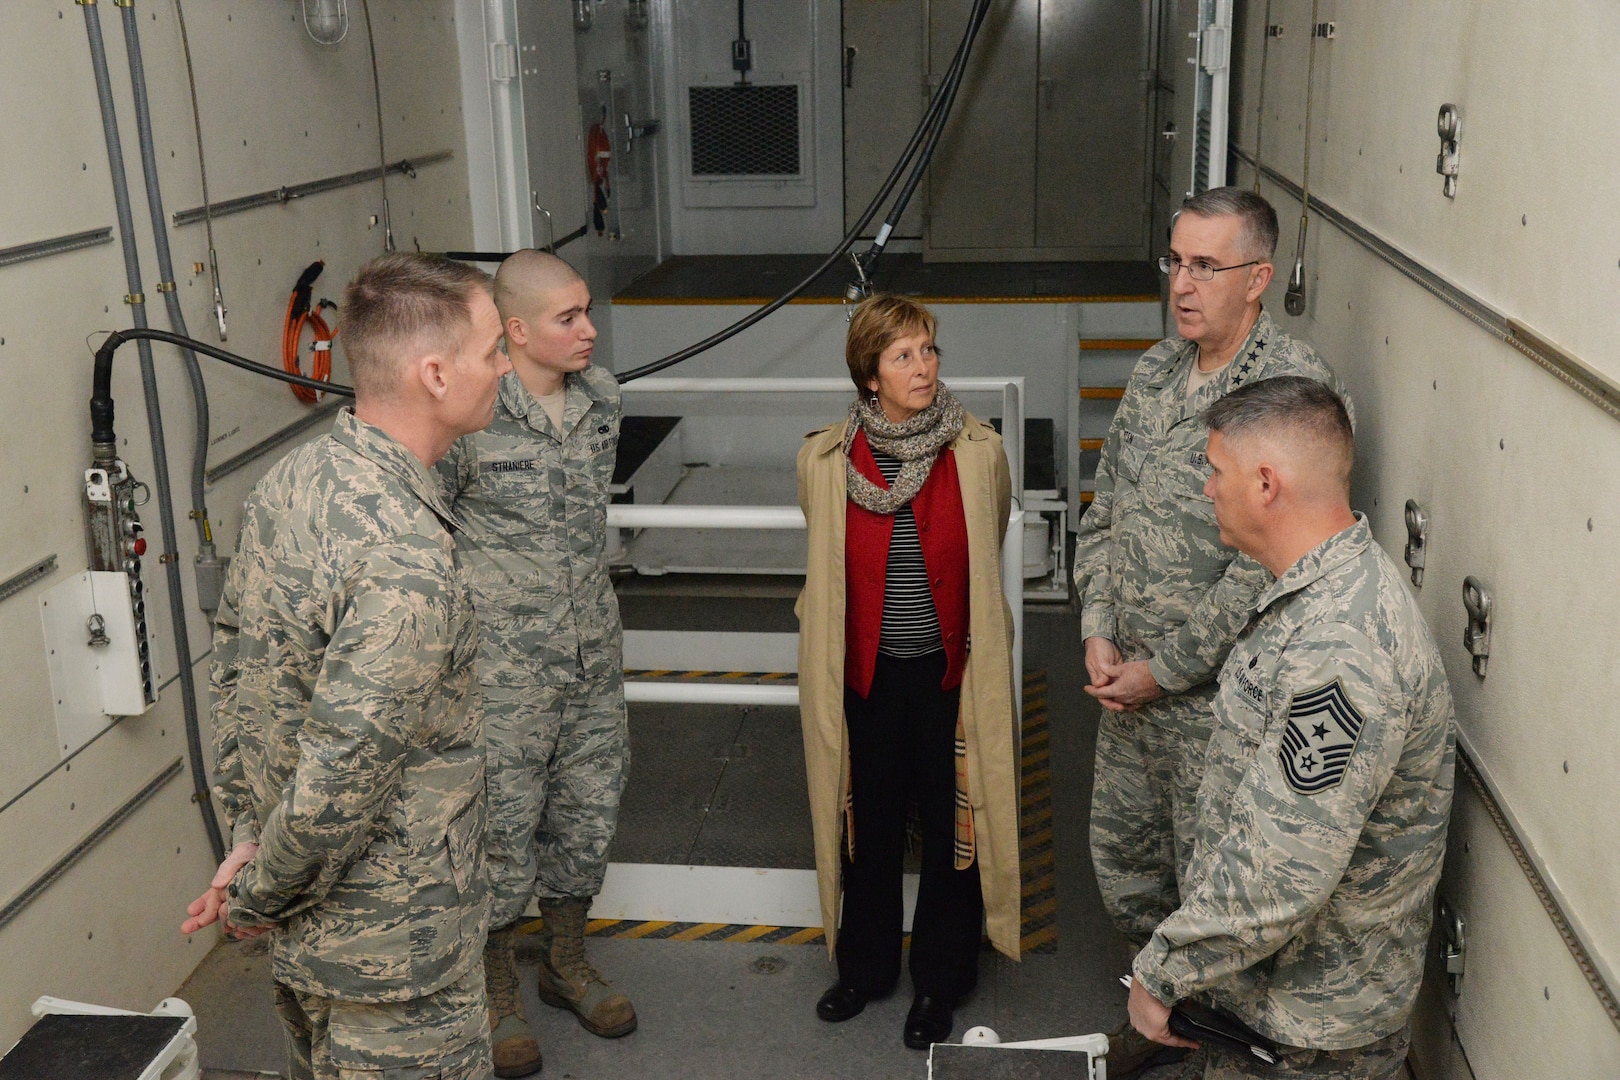 U.S. Air Force Gen. John Hyten, commander of U.S. Strategic Command (USSTRATCOM); his wife Laura; and Chief Master Sgt. Patrick McMahon, senior enlisted leader of USSTRATCOM, speak with Col. David Miller, 341st Maintenance Group commander, and Senior Airman Richard Straniere, 341st Maintenance Group maintainer, while touring a payload transporter in the maintenance bay at Malmstrom Air Force Base, Mont., Jan. 16, 2018.